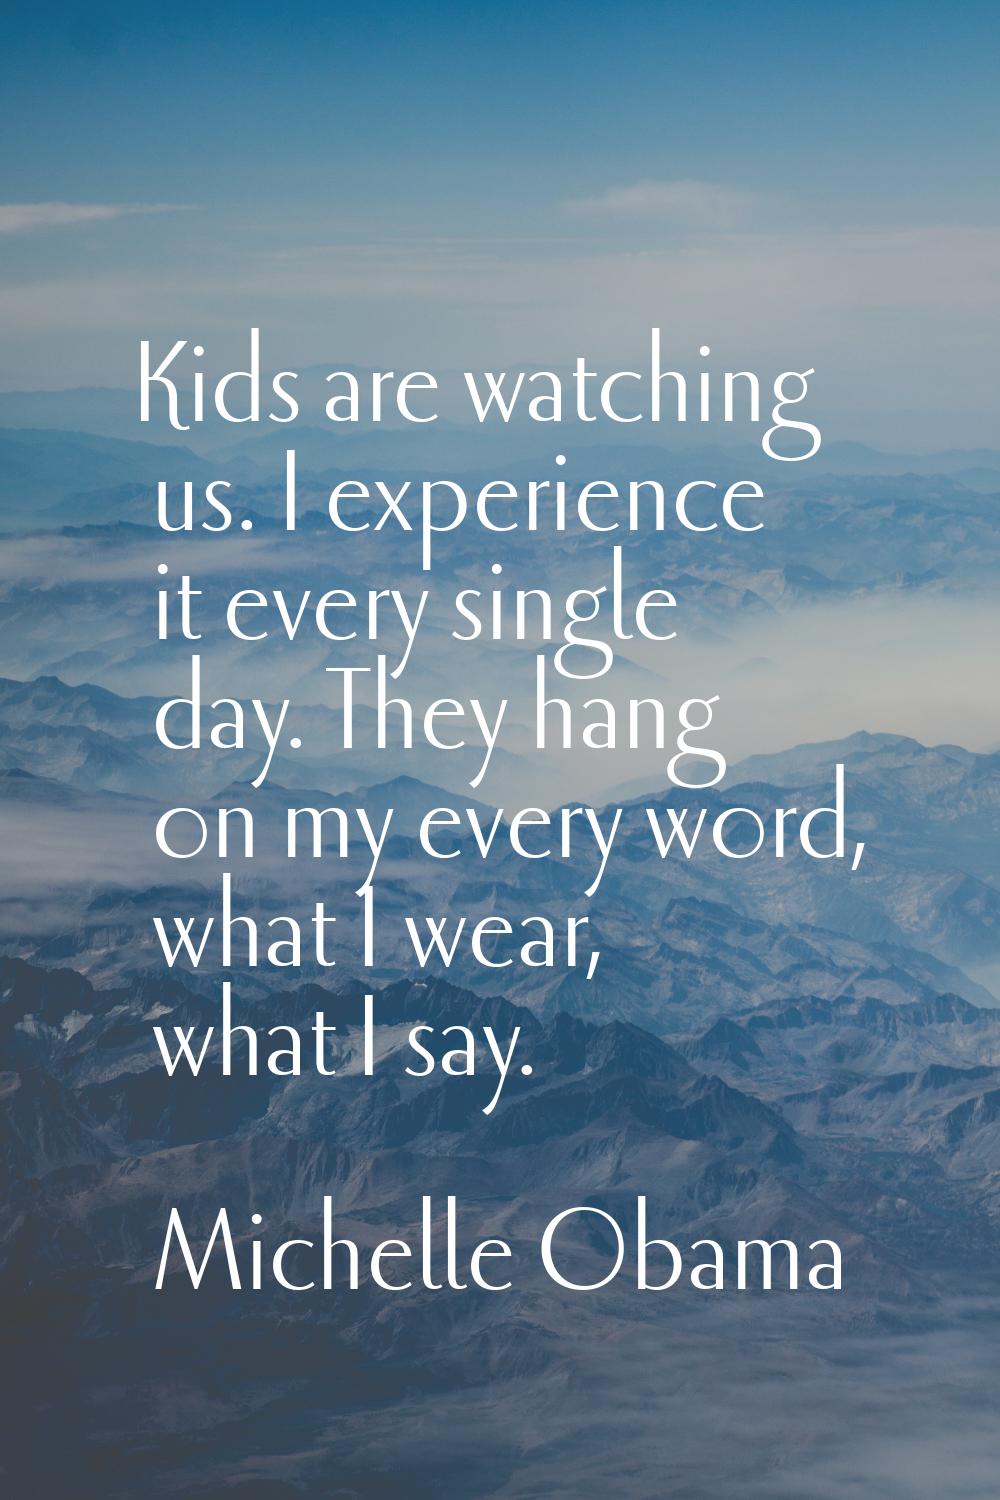 Kids are watching us. I experience it every single day. They hang on my every word, what I wear, wh